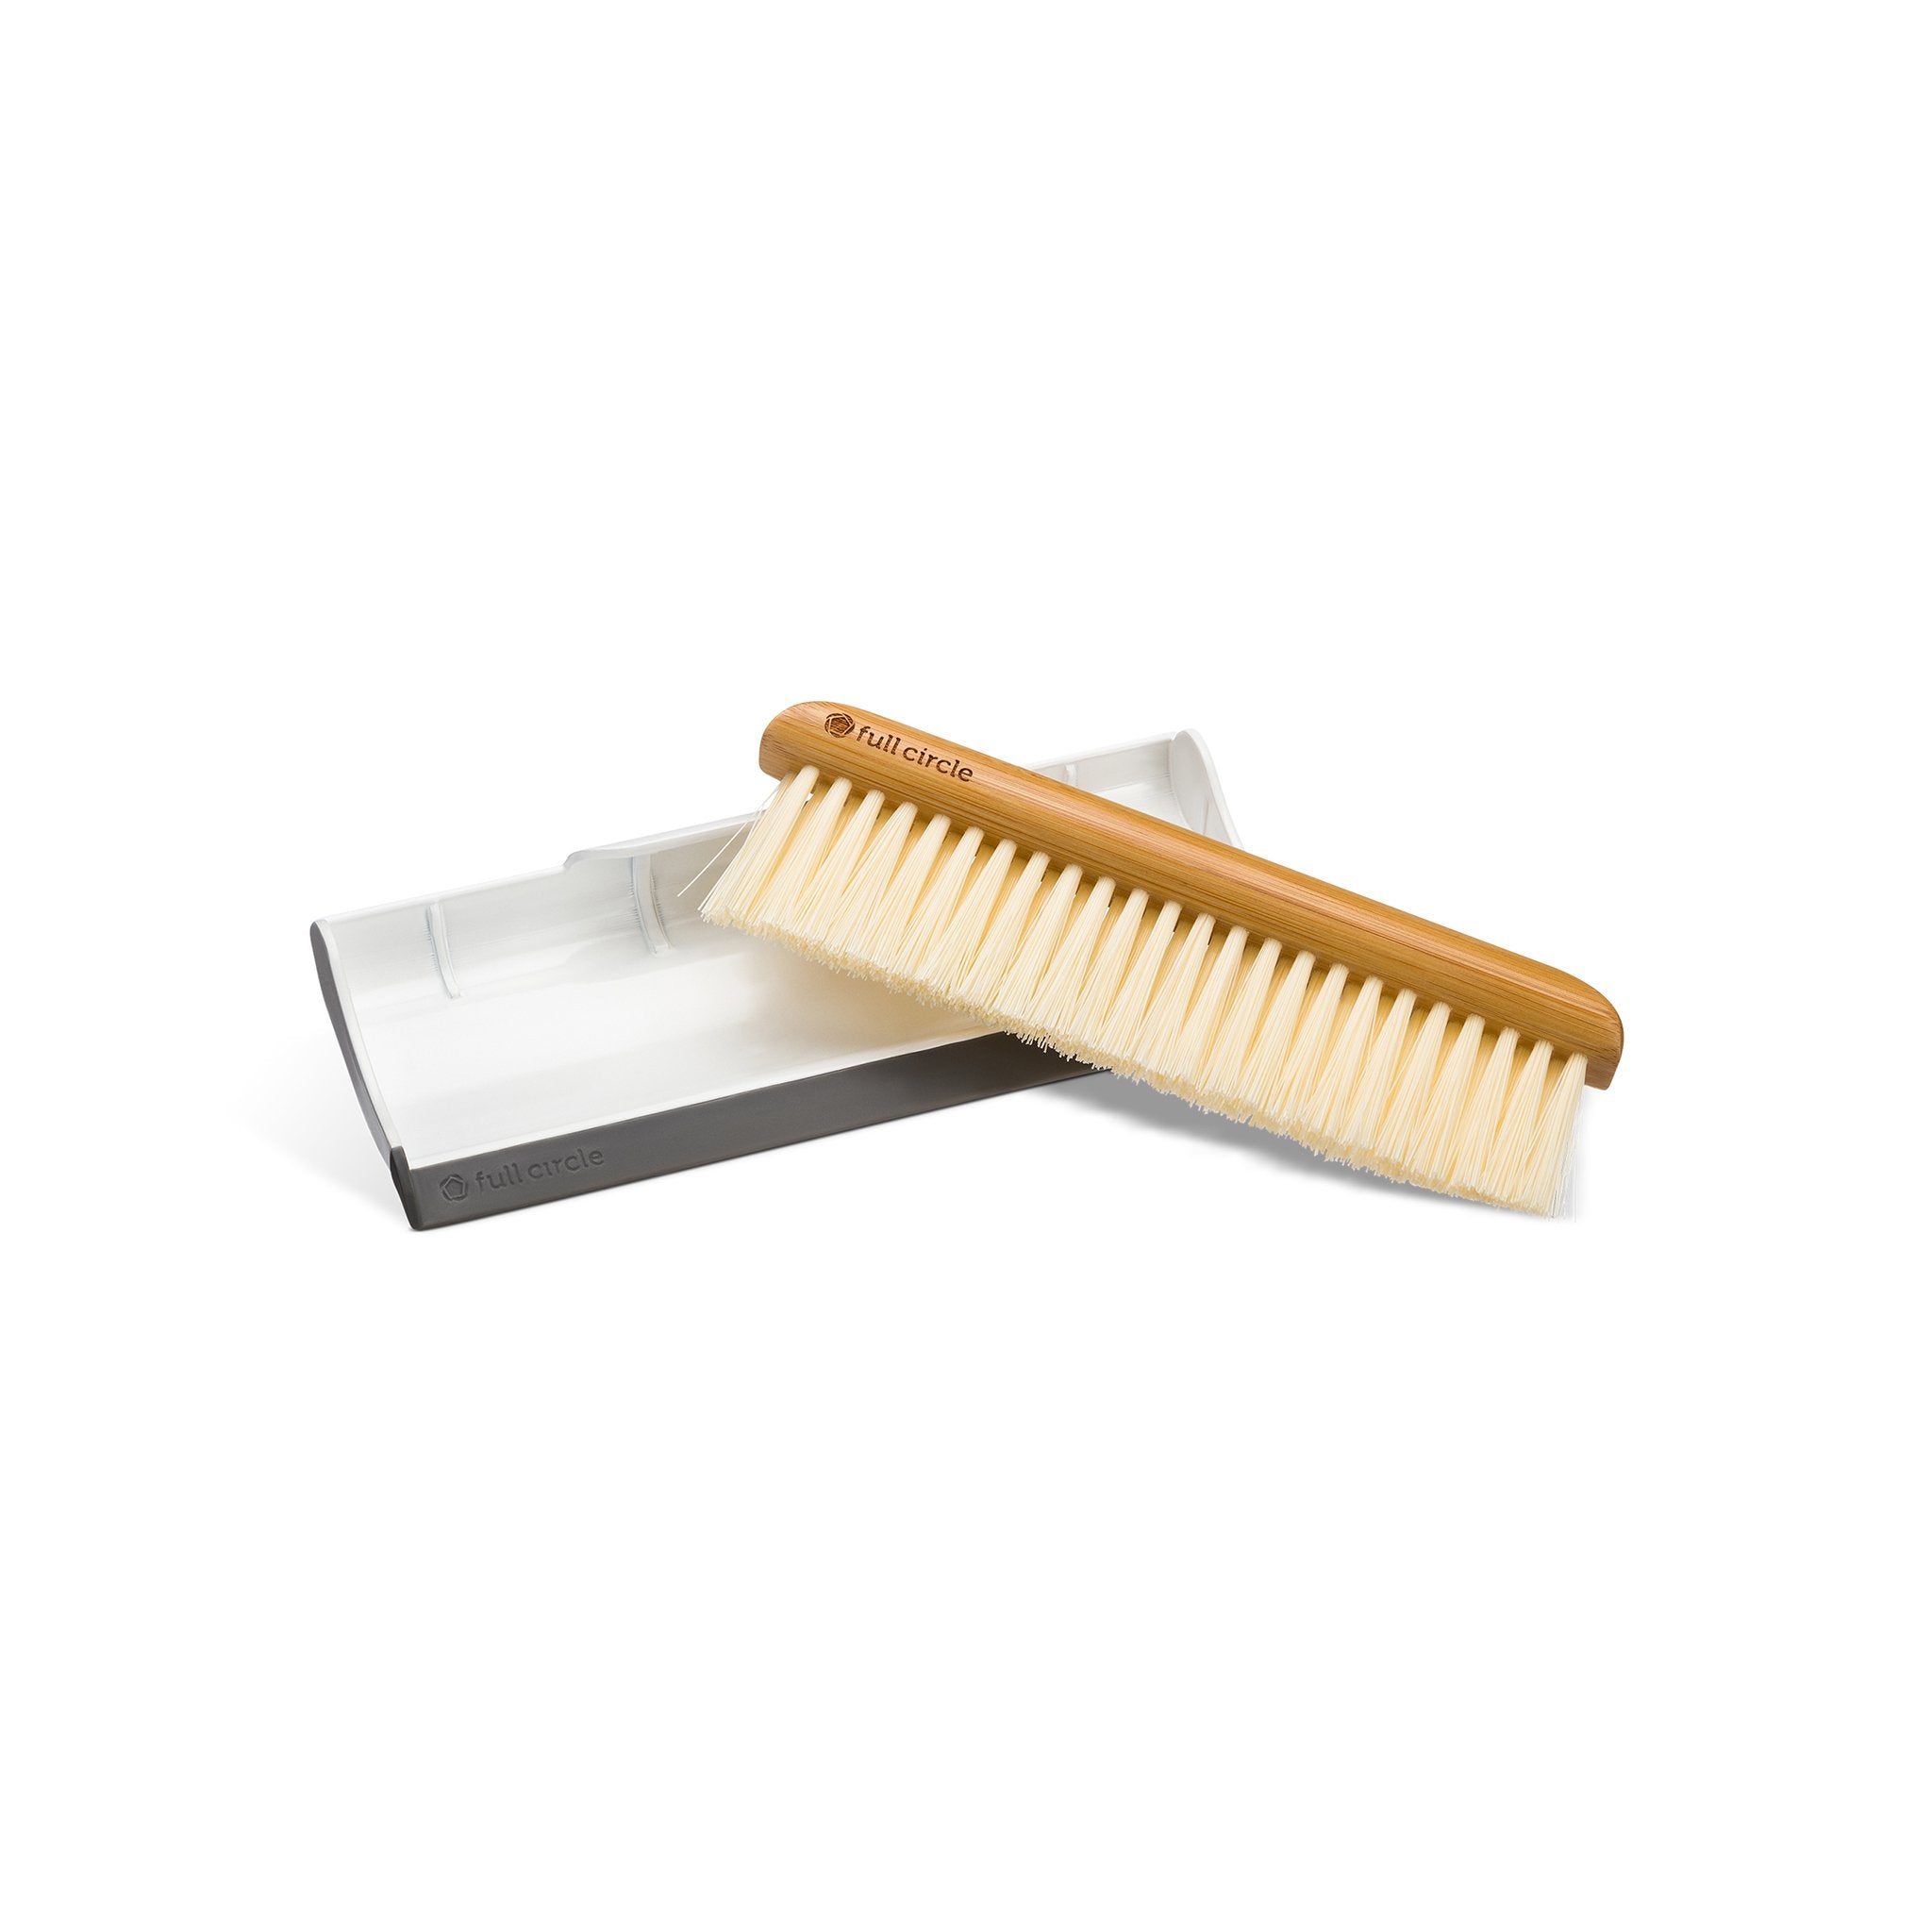 Full Circle Green Crumb Runner Counter Sweep & Squeegee